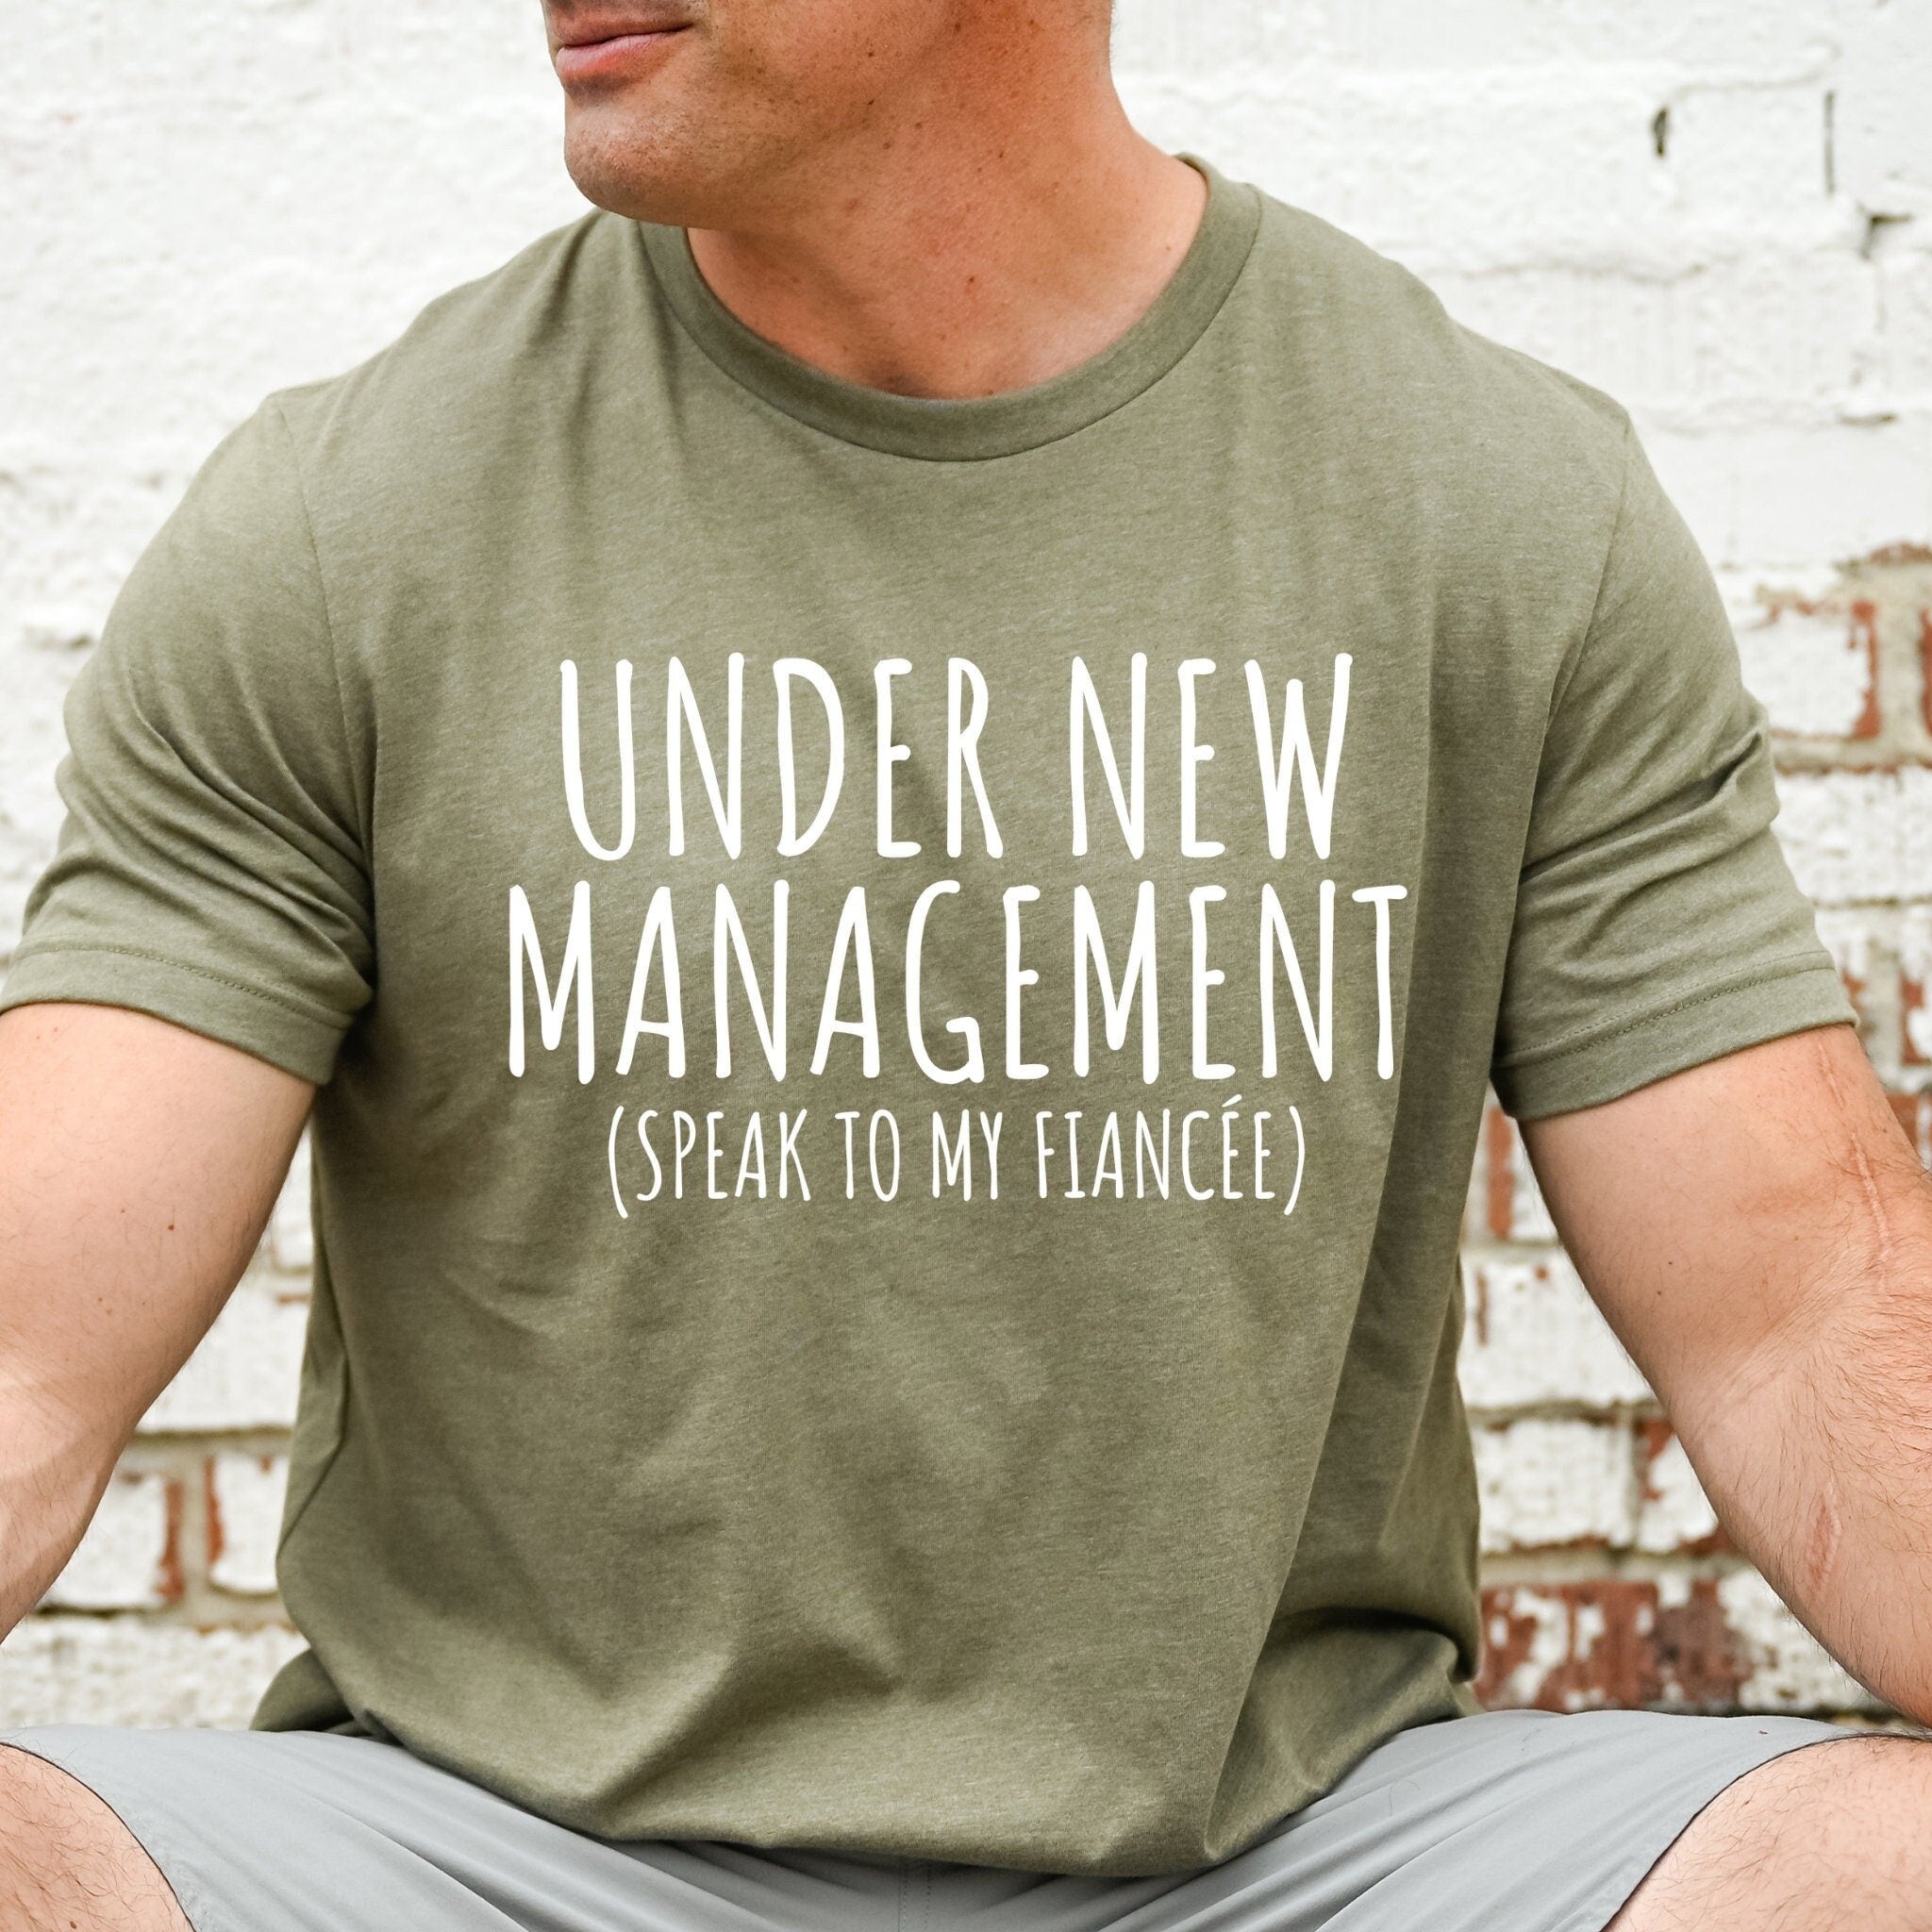 Make Him Feel Special: 'New Husband' Tee - Ideal for Engagements & Weddings